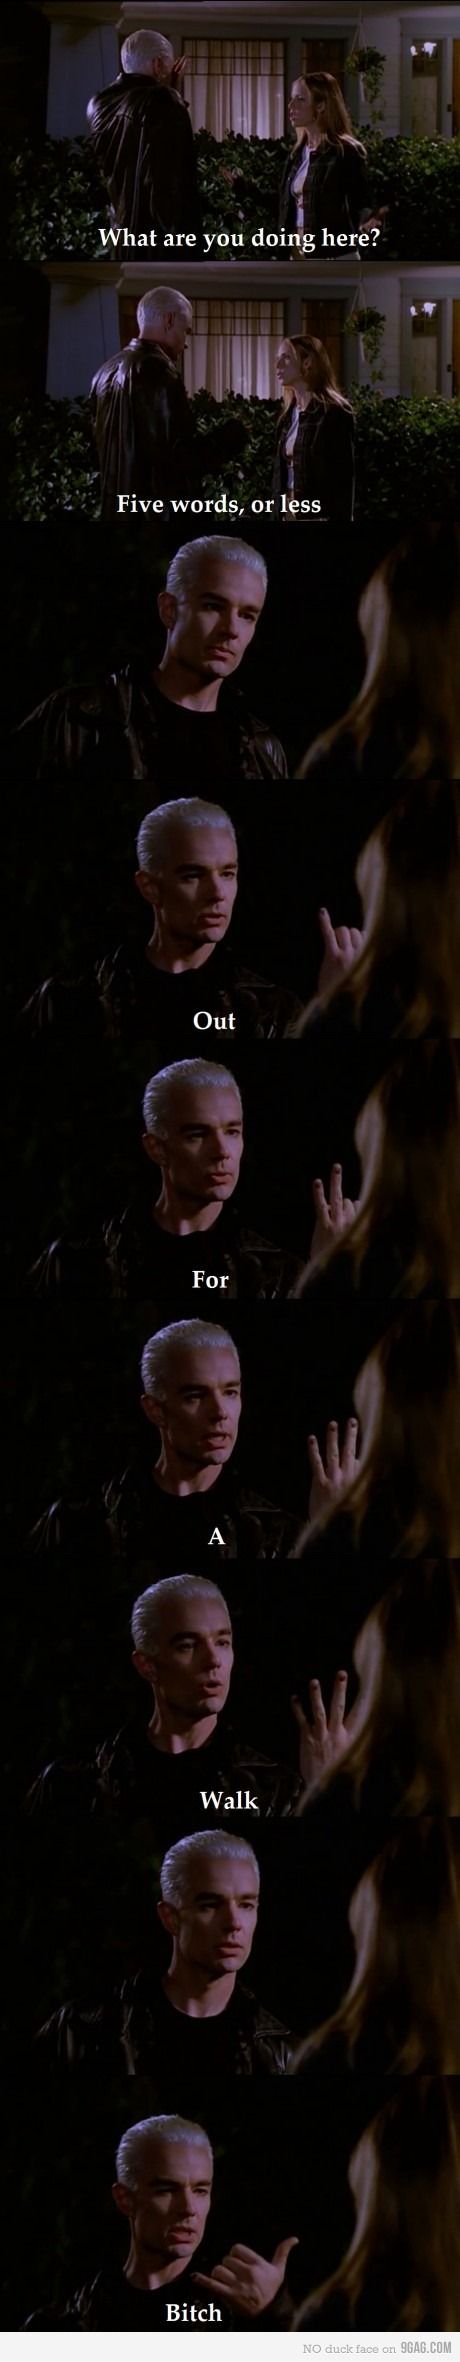 Classic Buffy moment courtesy of Spike.